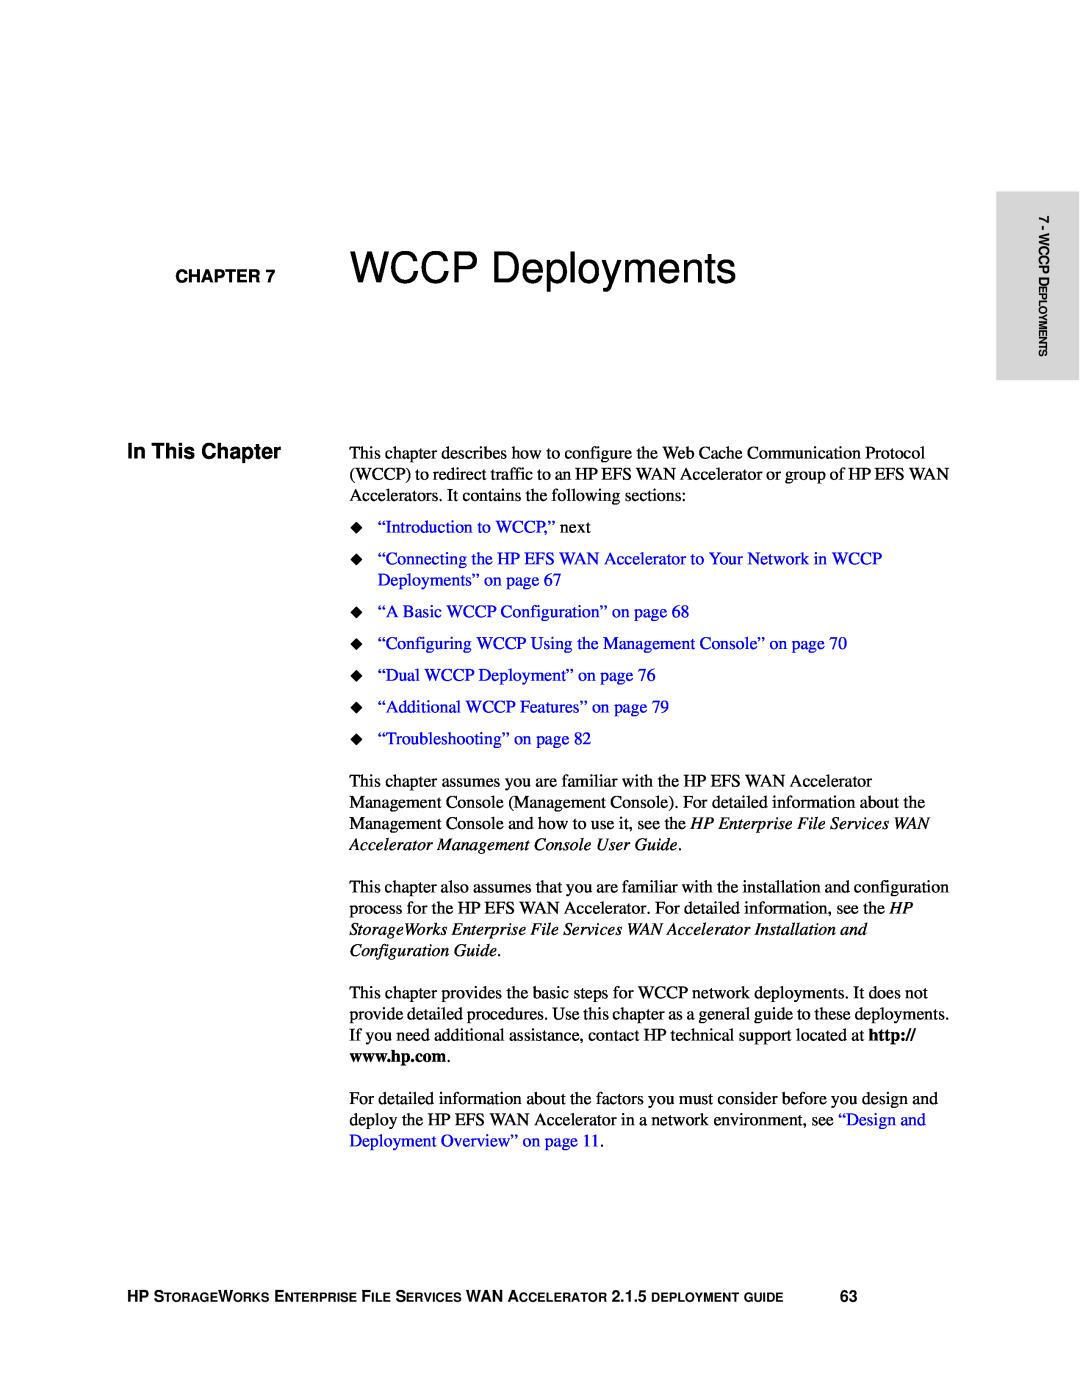 HP Enterprise File Services WAN Accelerator WCCP Deployments, ‹ “Introduction to WCCP,” next, ‹ “Troubleshooting” on page 